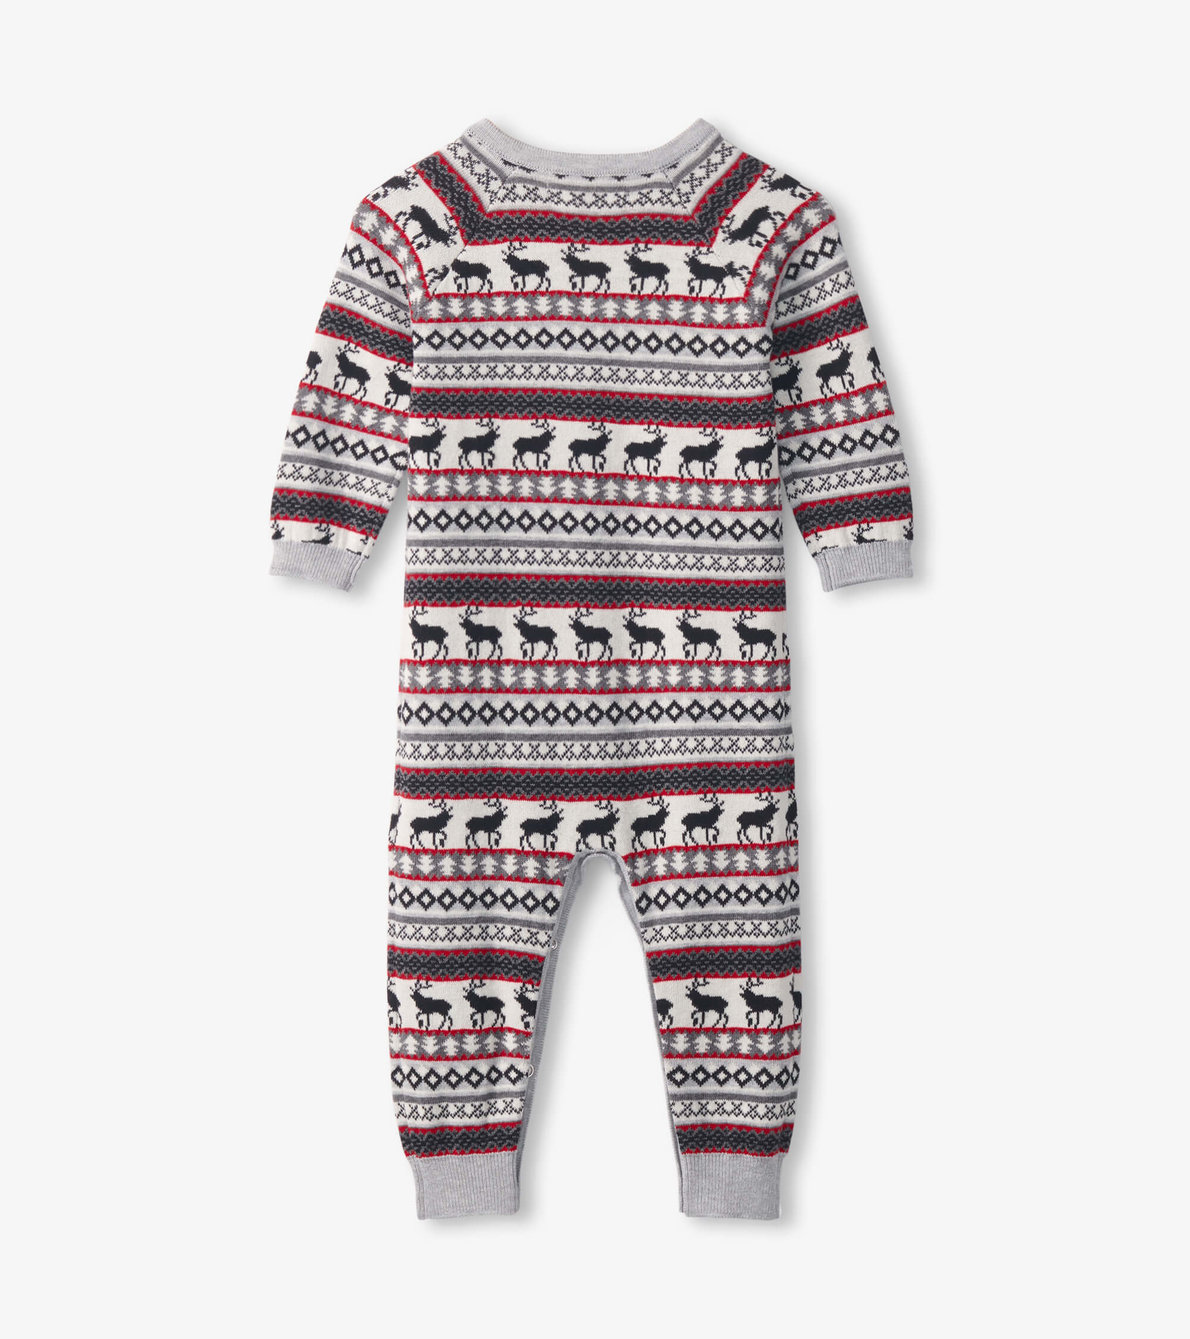 View larger image of Baby Stag Fairisle Sweater Onesie